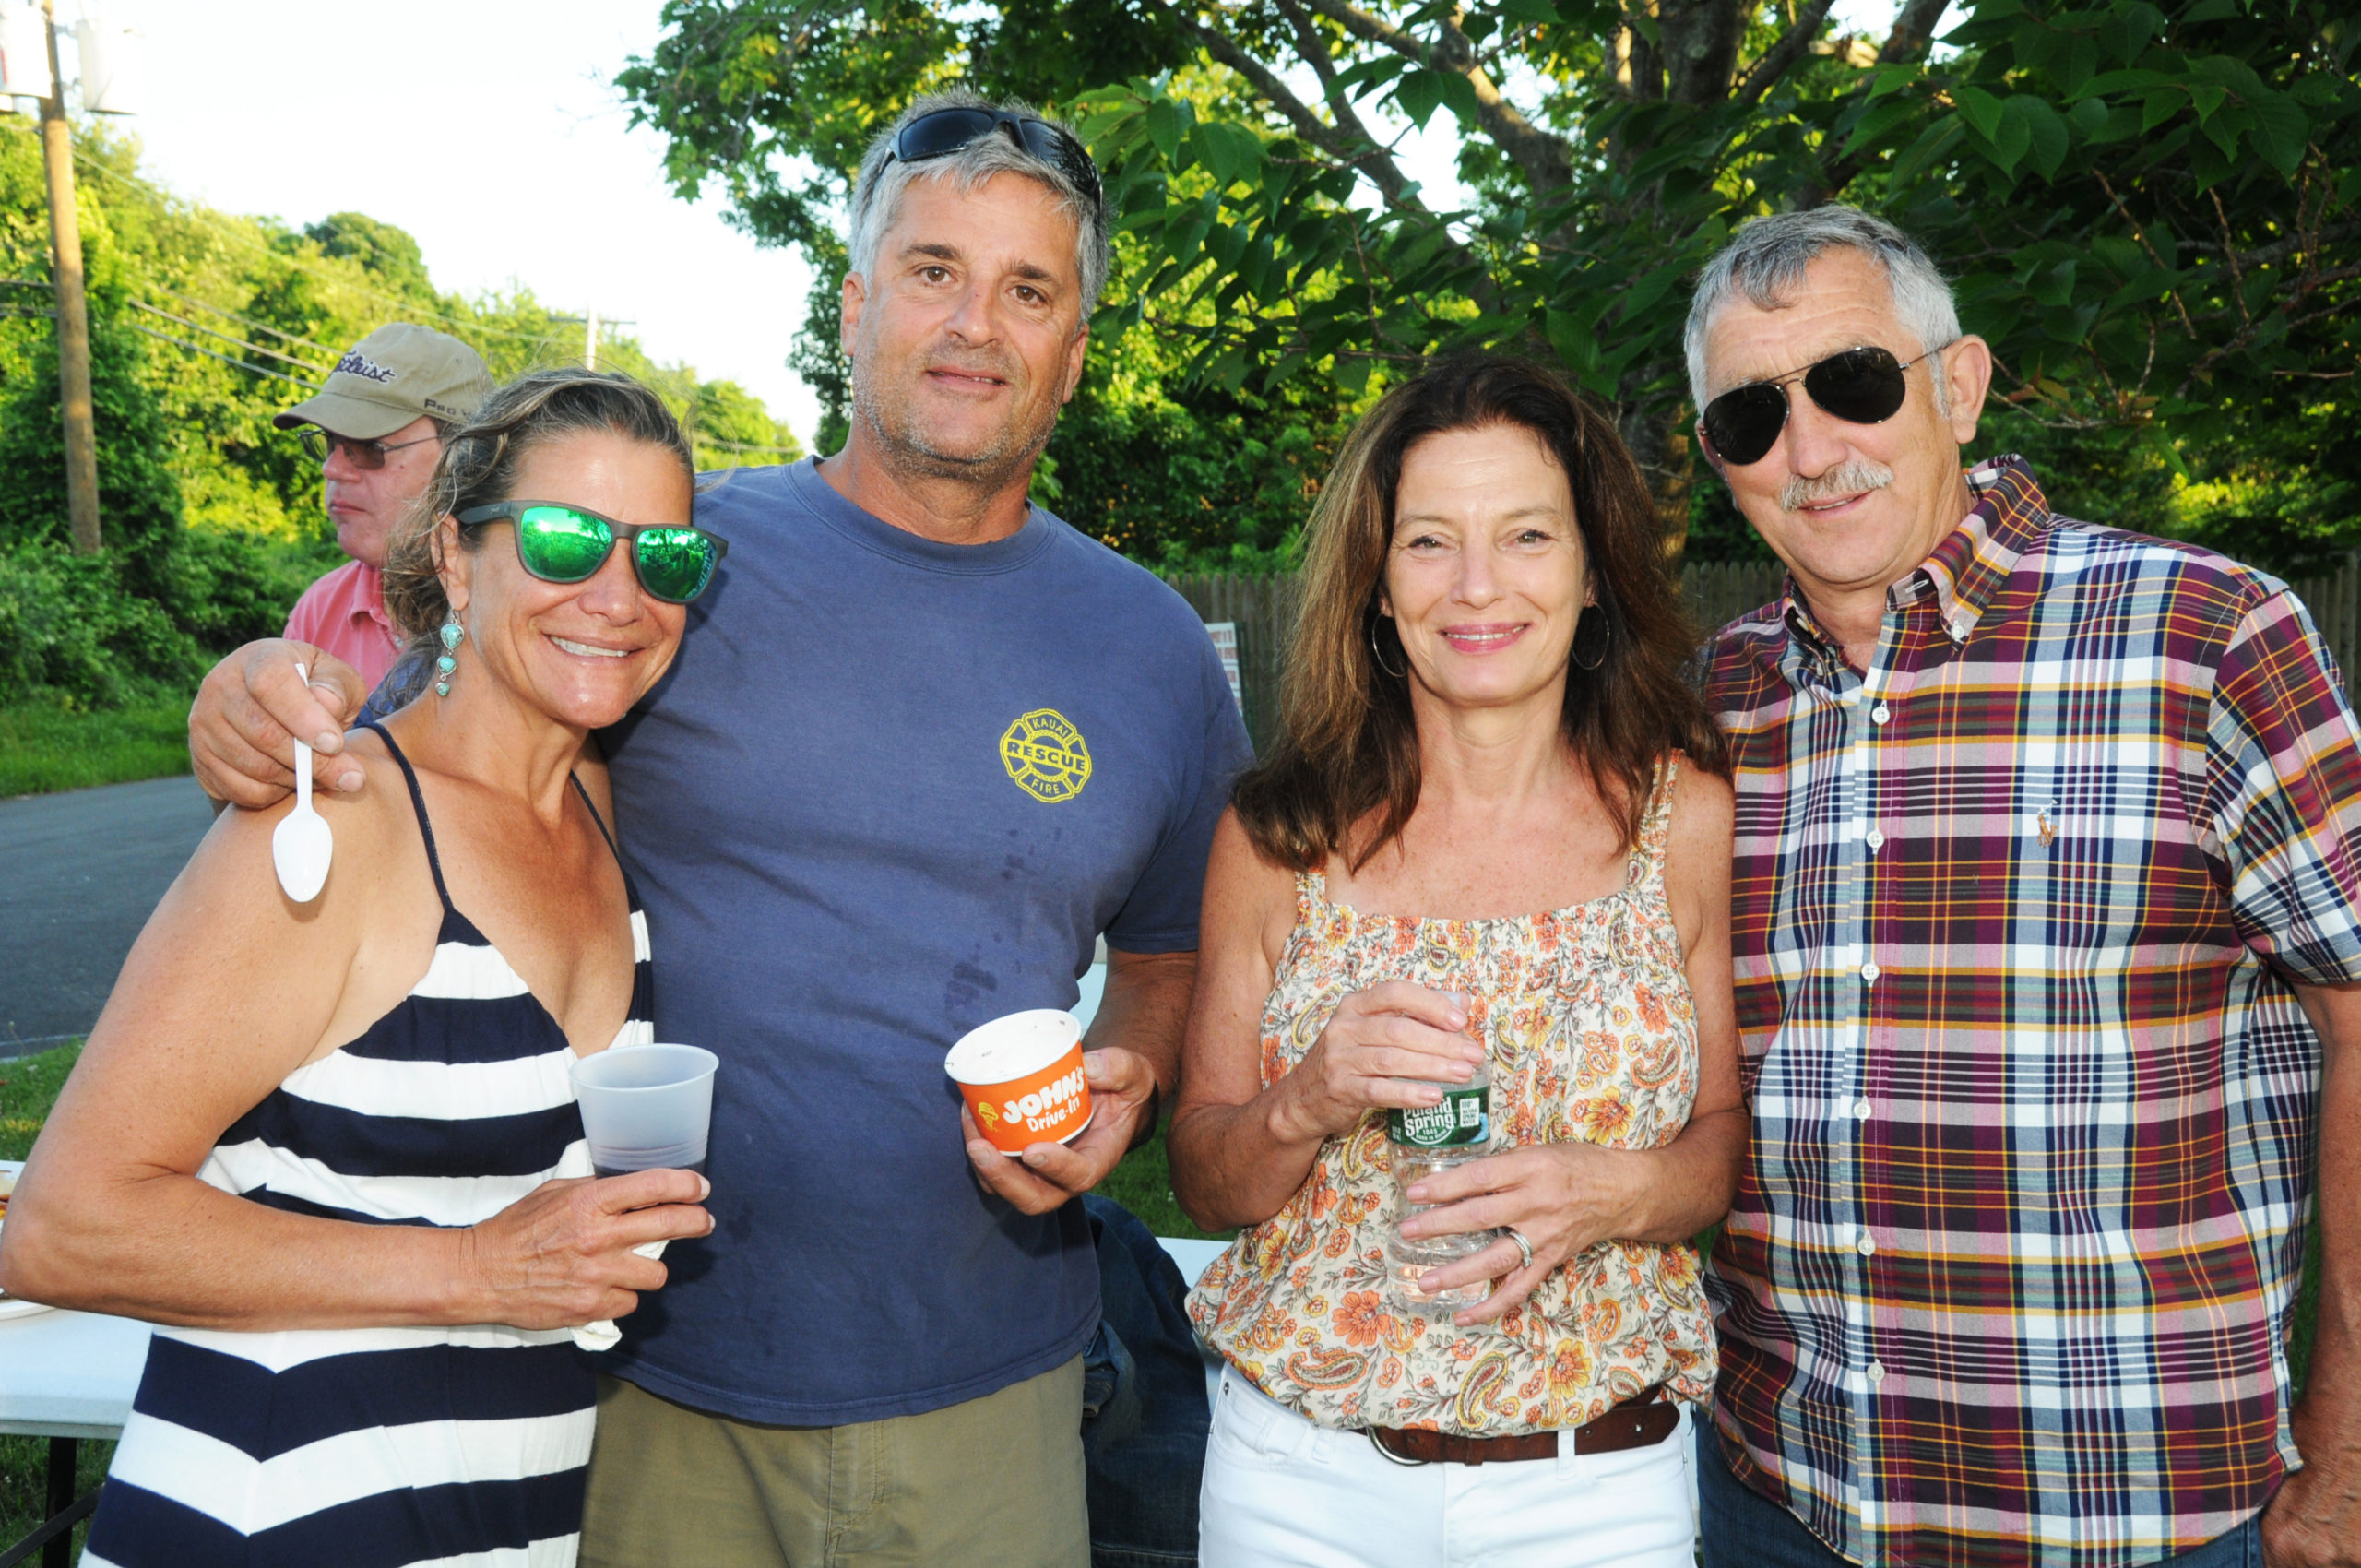 Trish and John De Sousa with Nora and Jim Grimes at the  Montauk Fire Department held its Annual Barbecue on June 28. Members and their Families enjoyed classic picnic food, including burgers, corn on the cob, hot dogs and Dreesen's famous doughnuts. Montauk's John's Drive-In satisfied everyone's sweet tooth with a variety of treats from their ice cream truck.   RICHARD LEWIN